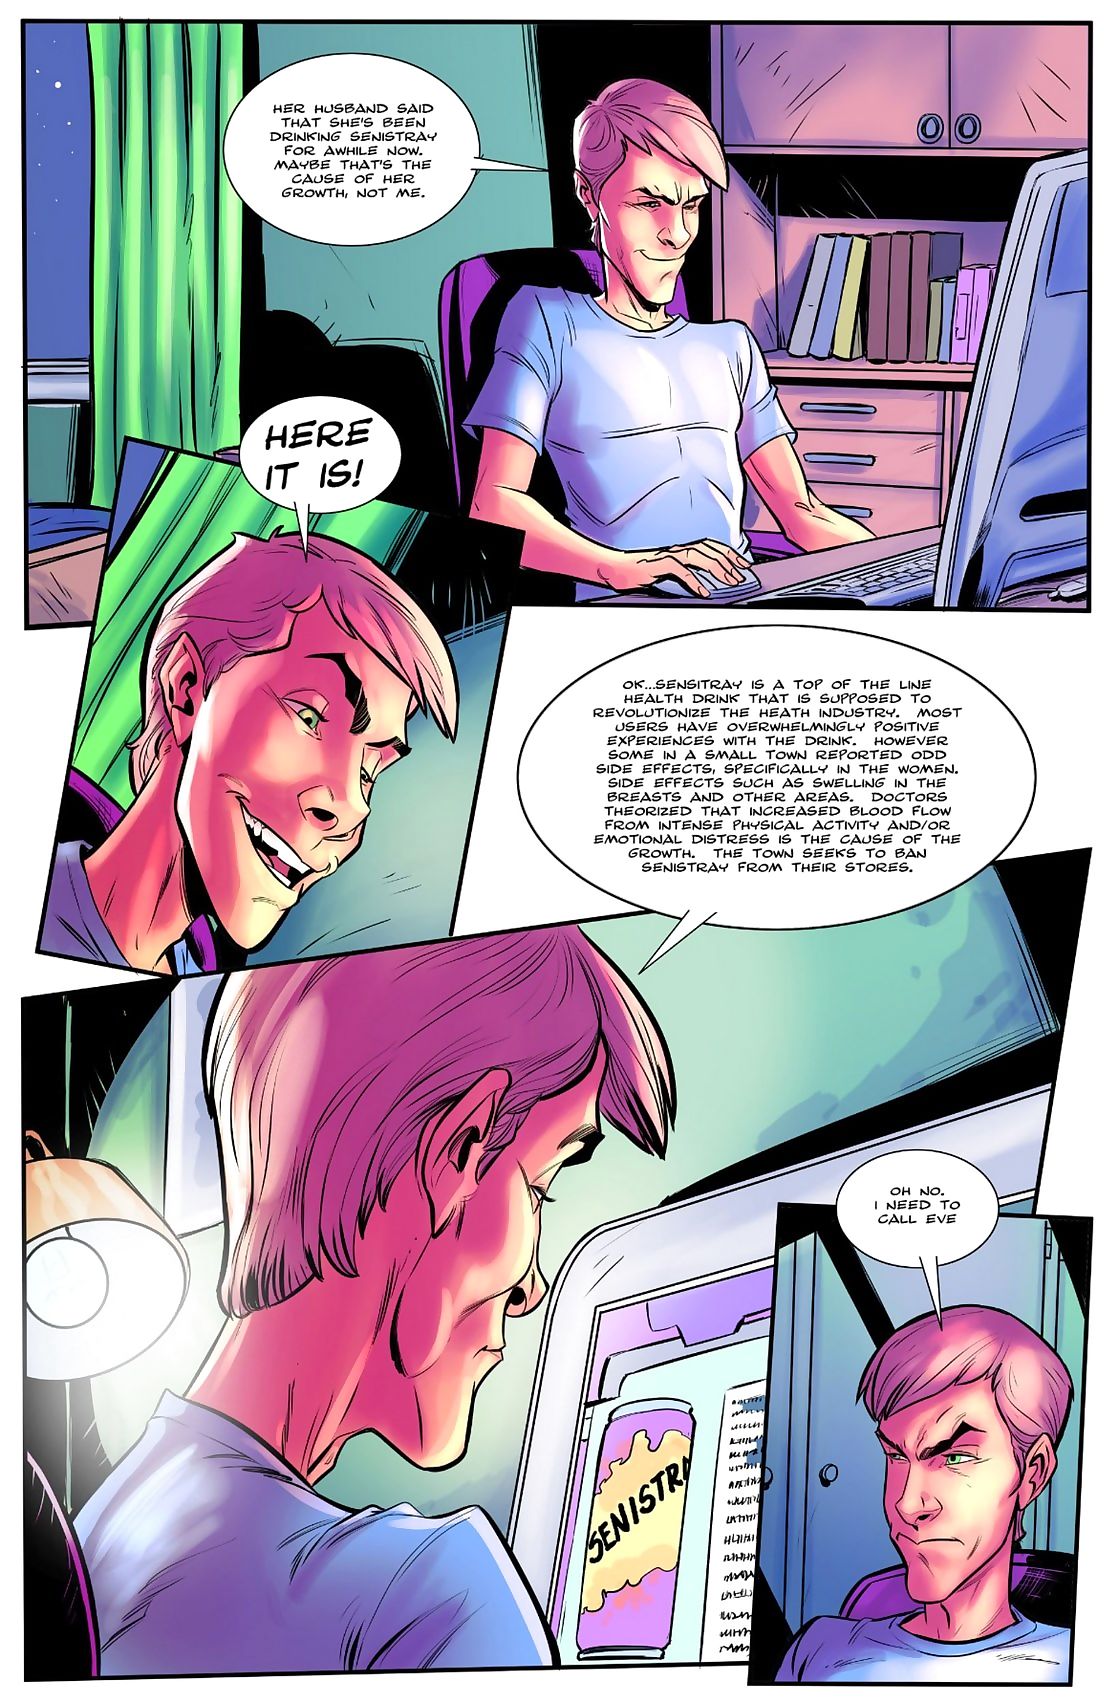 Bot- Mrs. Turner Issue 07 page 1